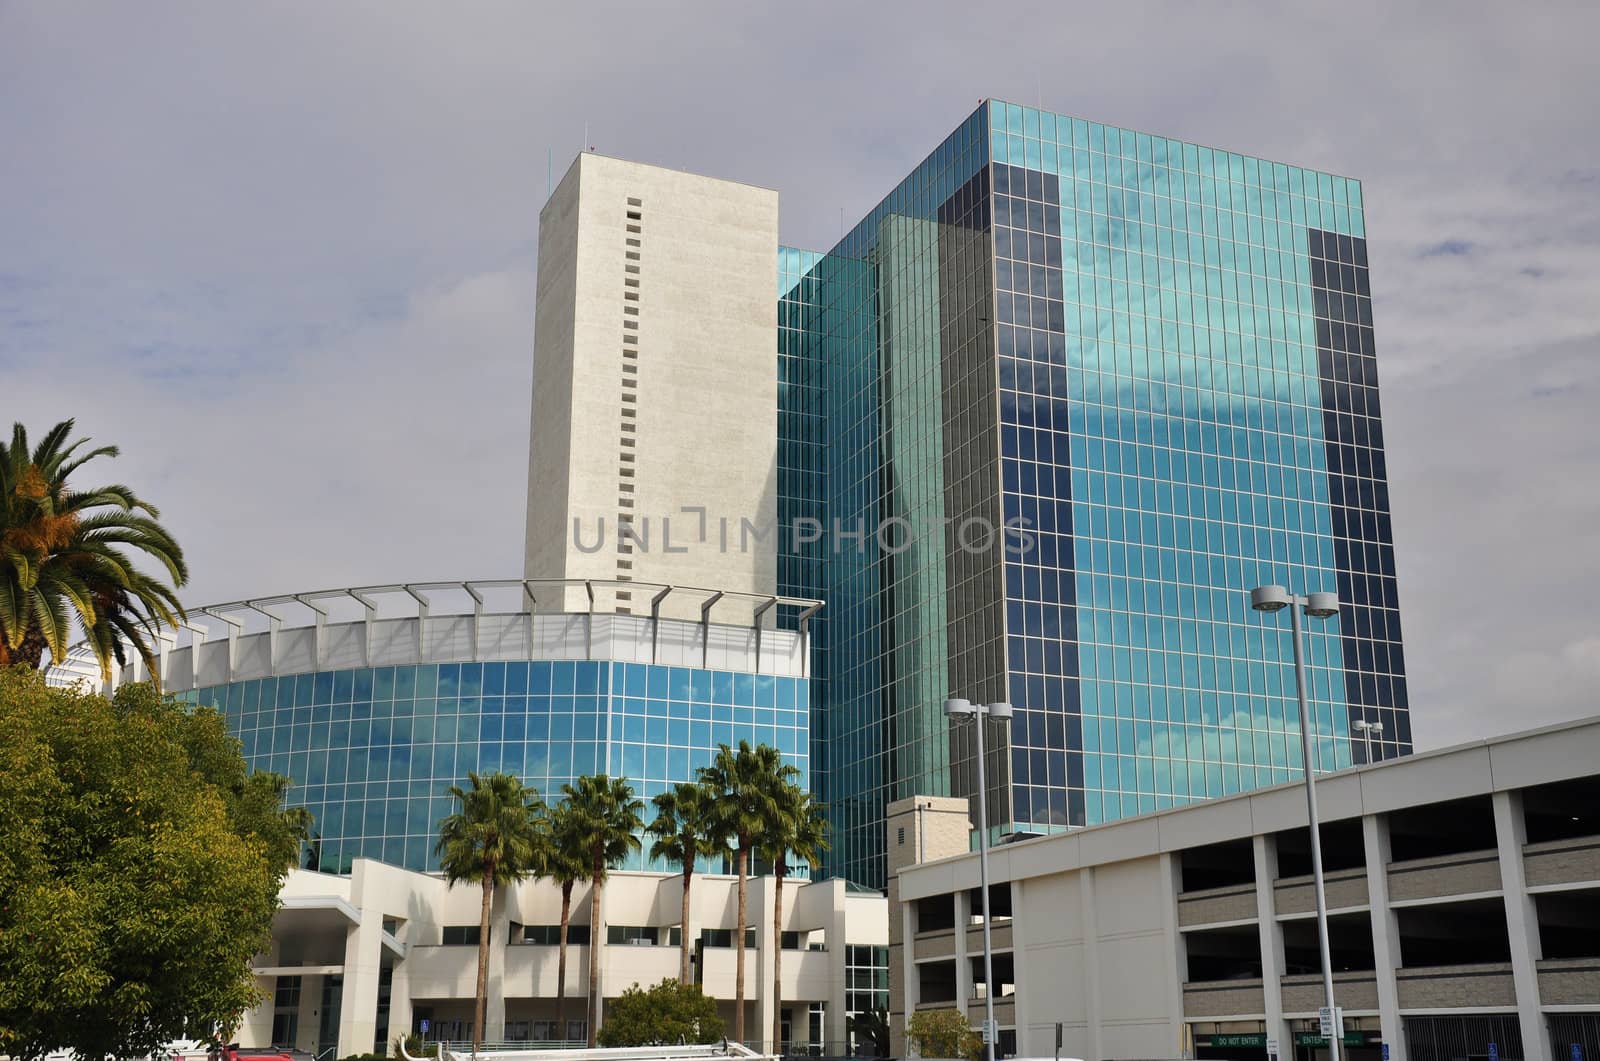 View of a modern glass office tower in downtown Riverside, California.